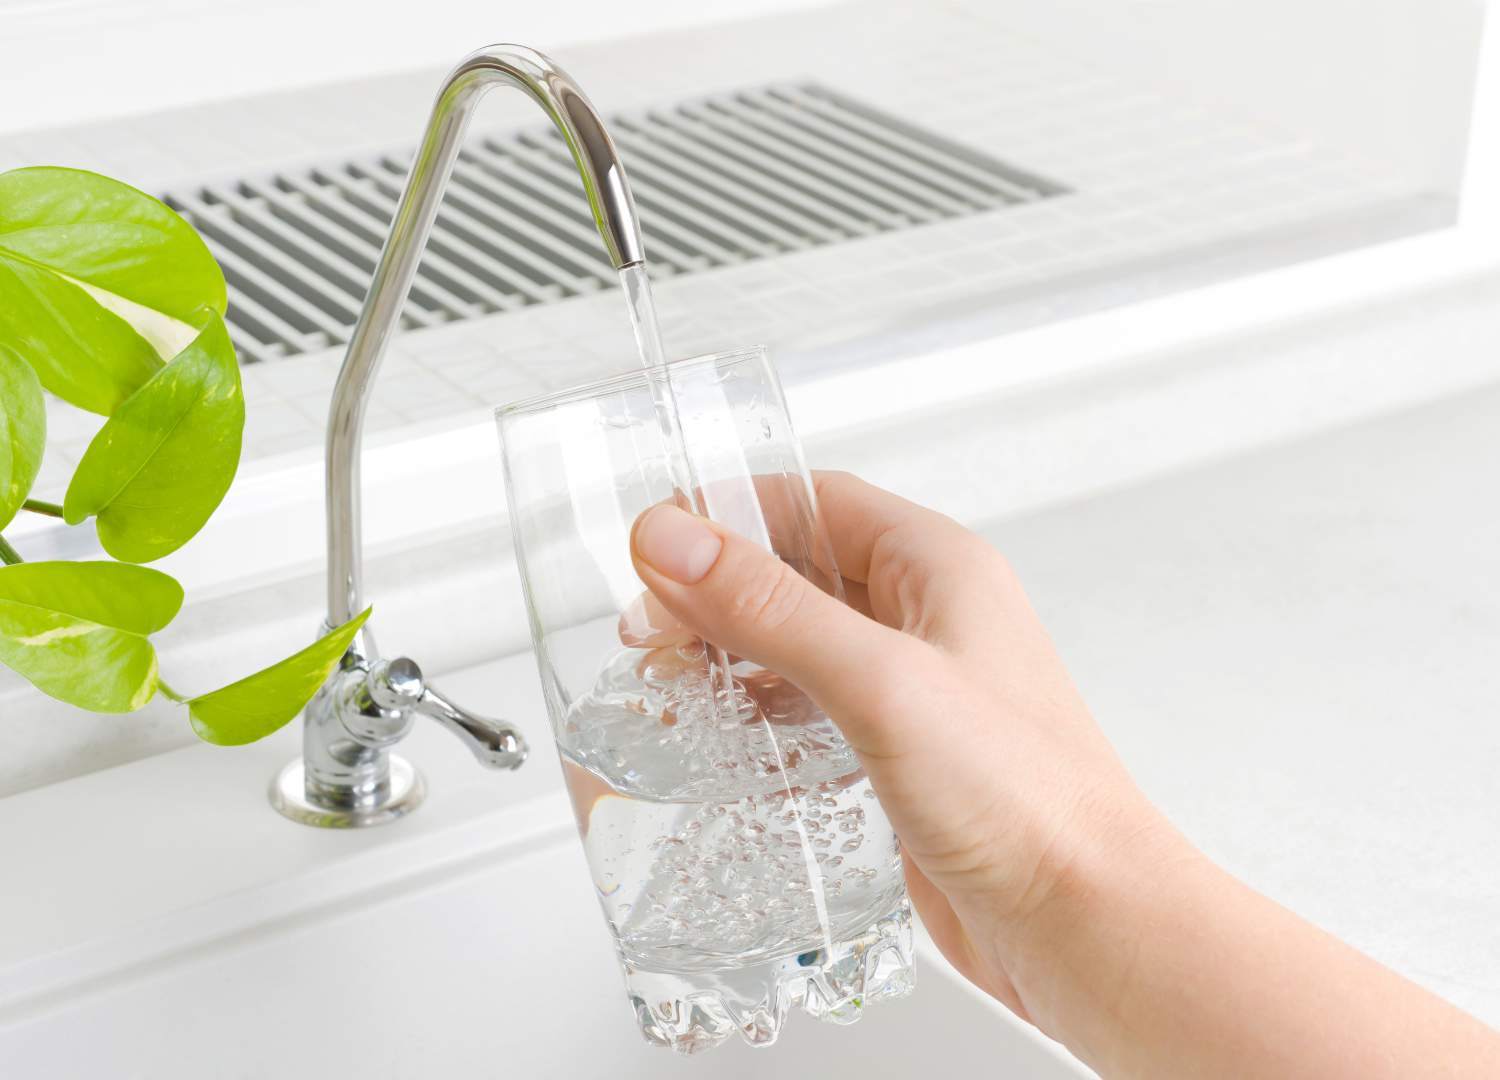 When is the Time to Change the Water Filter in Your Kitchen?